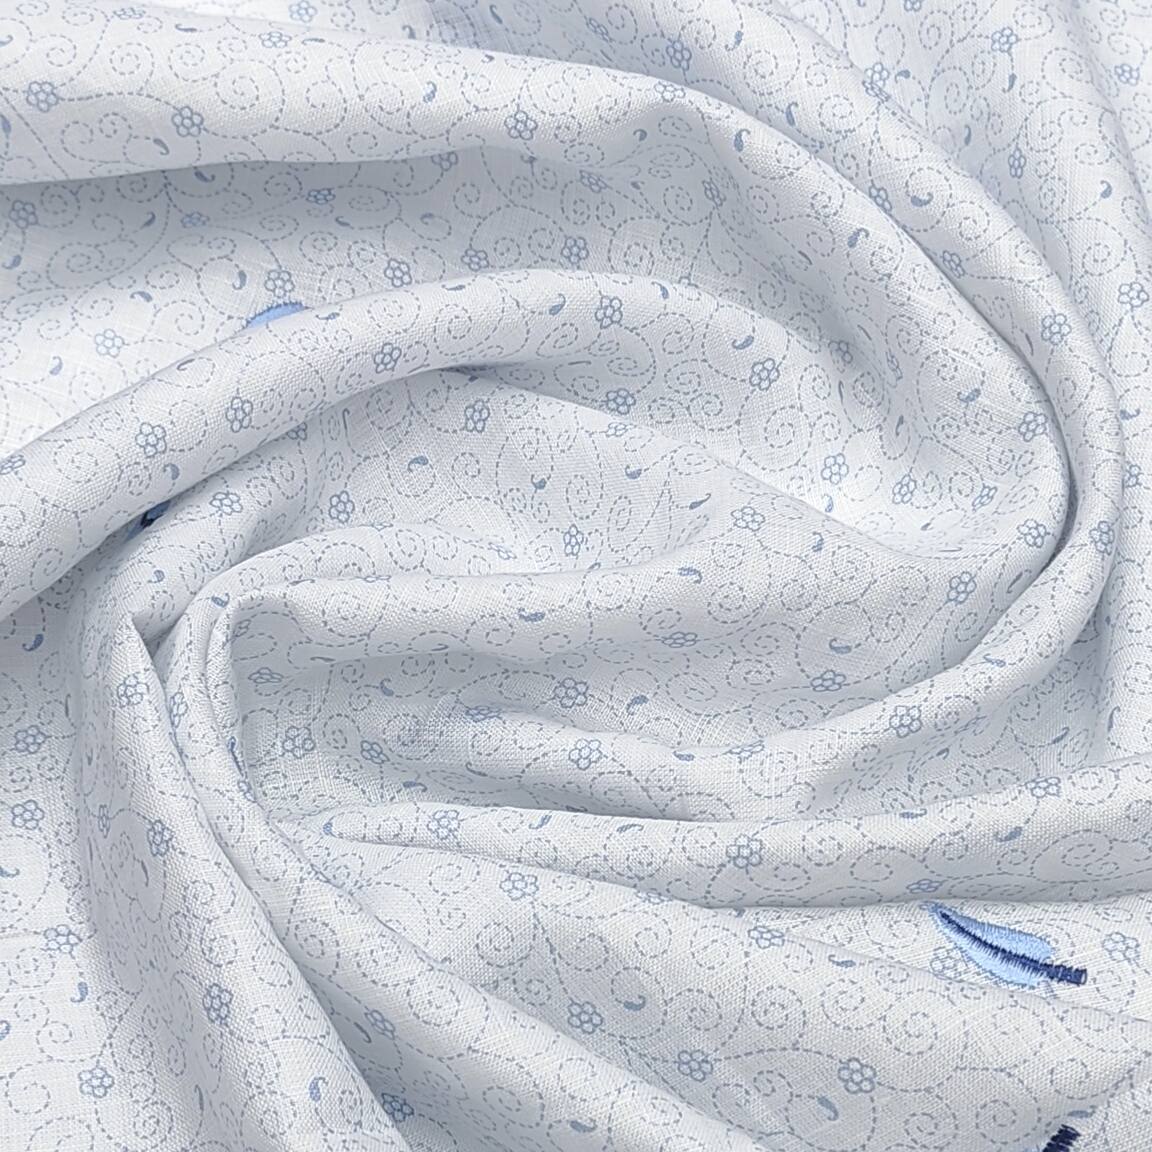 Solino 100% linen White Printed and blue embroidery Shirt Fabric